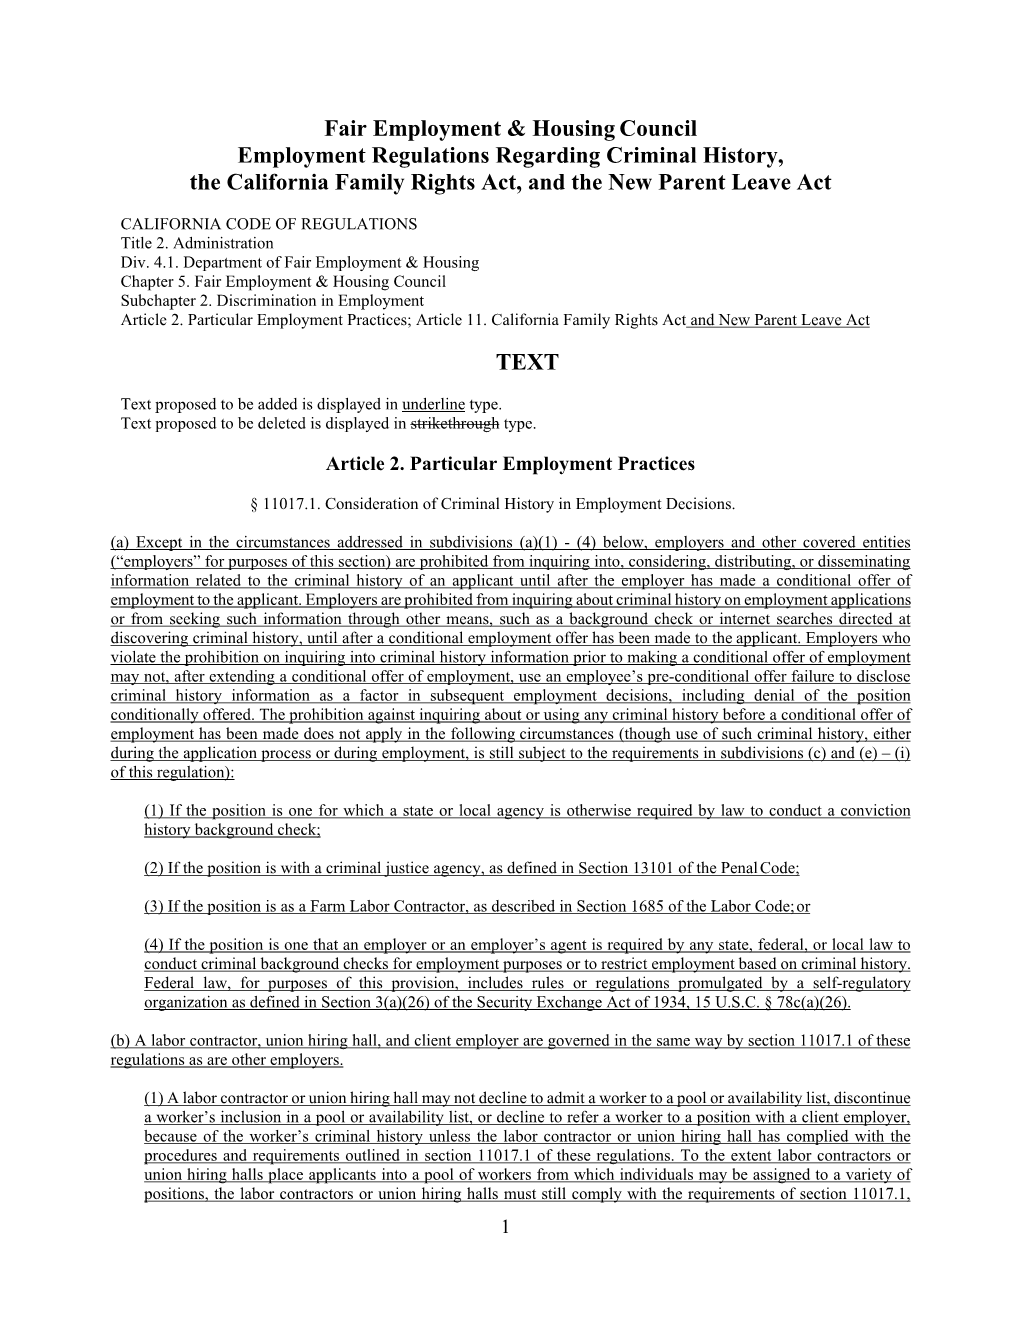 Final Text of Employment Regulations Regarding Criminal History, the California Family Rights Act, and the New Parent Leave